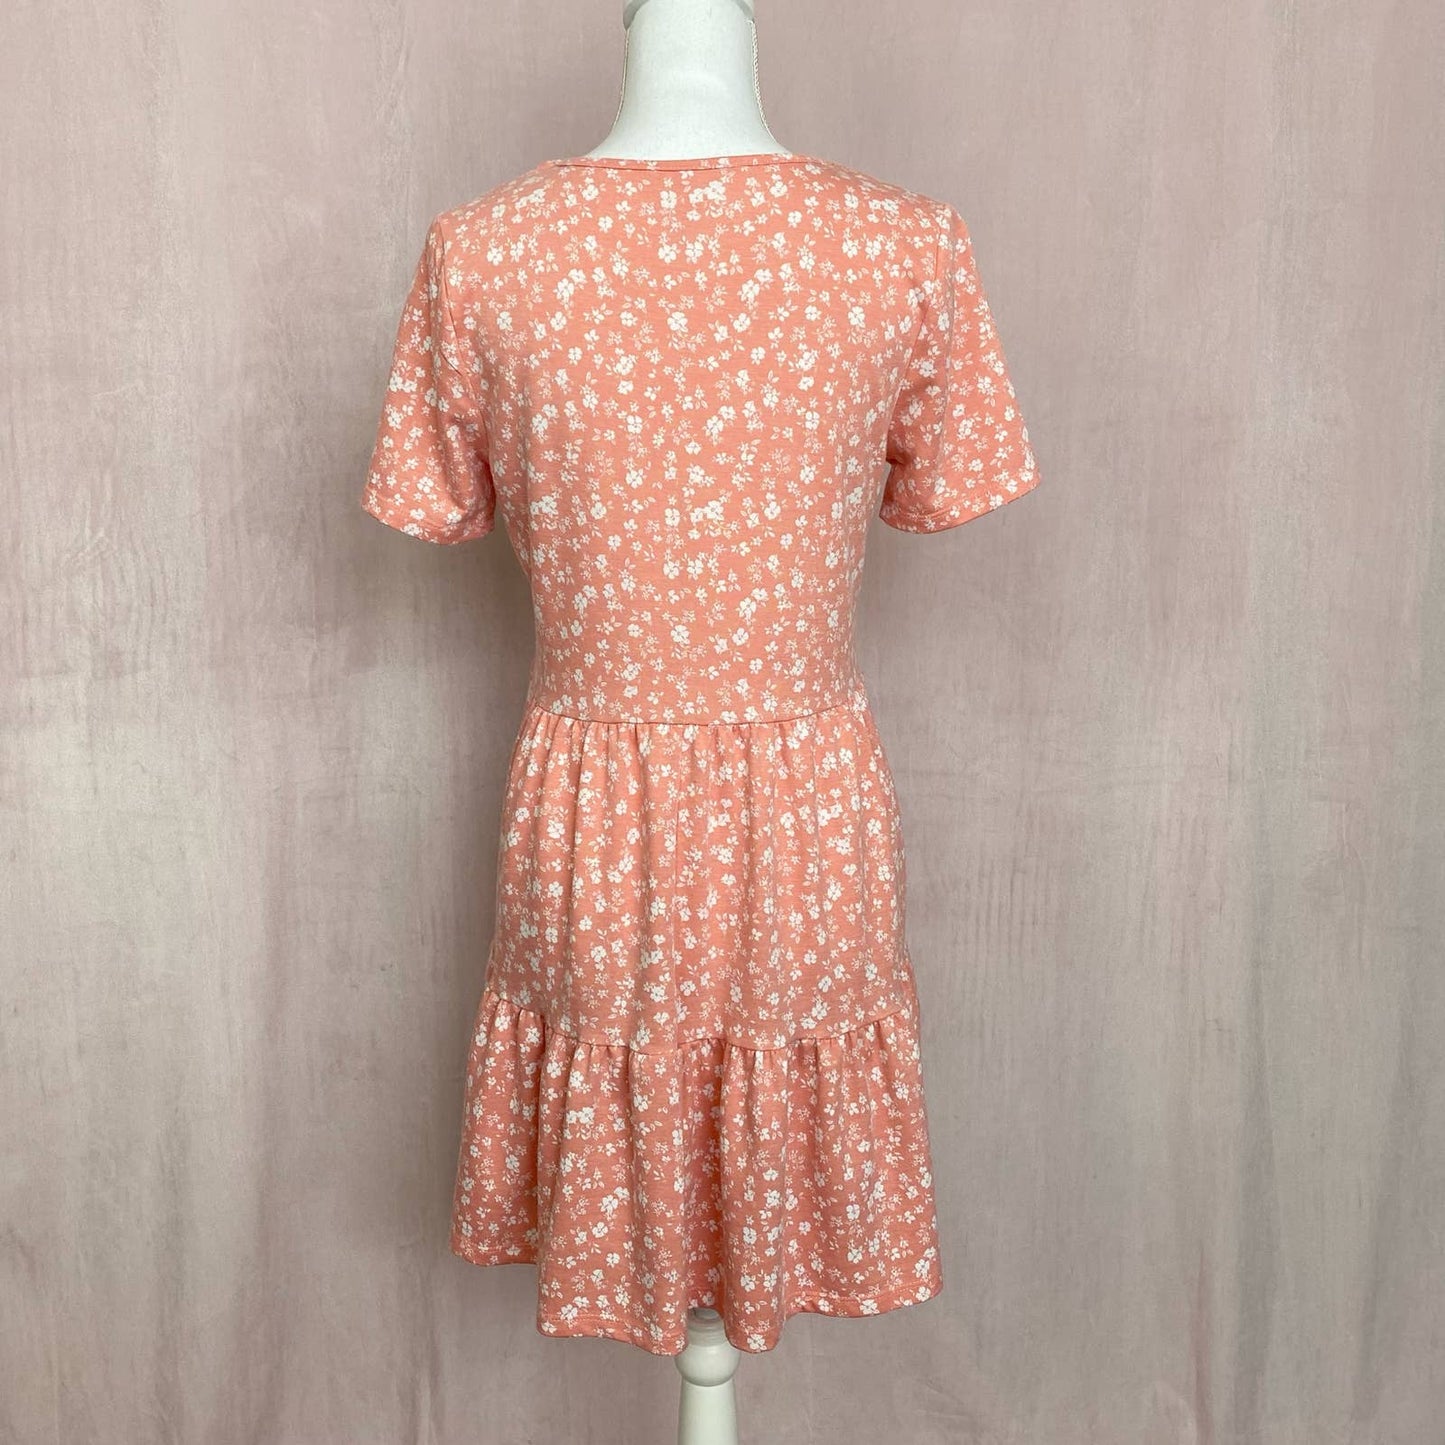 Secondhand Como Vintage Floral Tiered Mini Babydoll Dress, Size Small